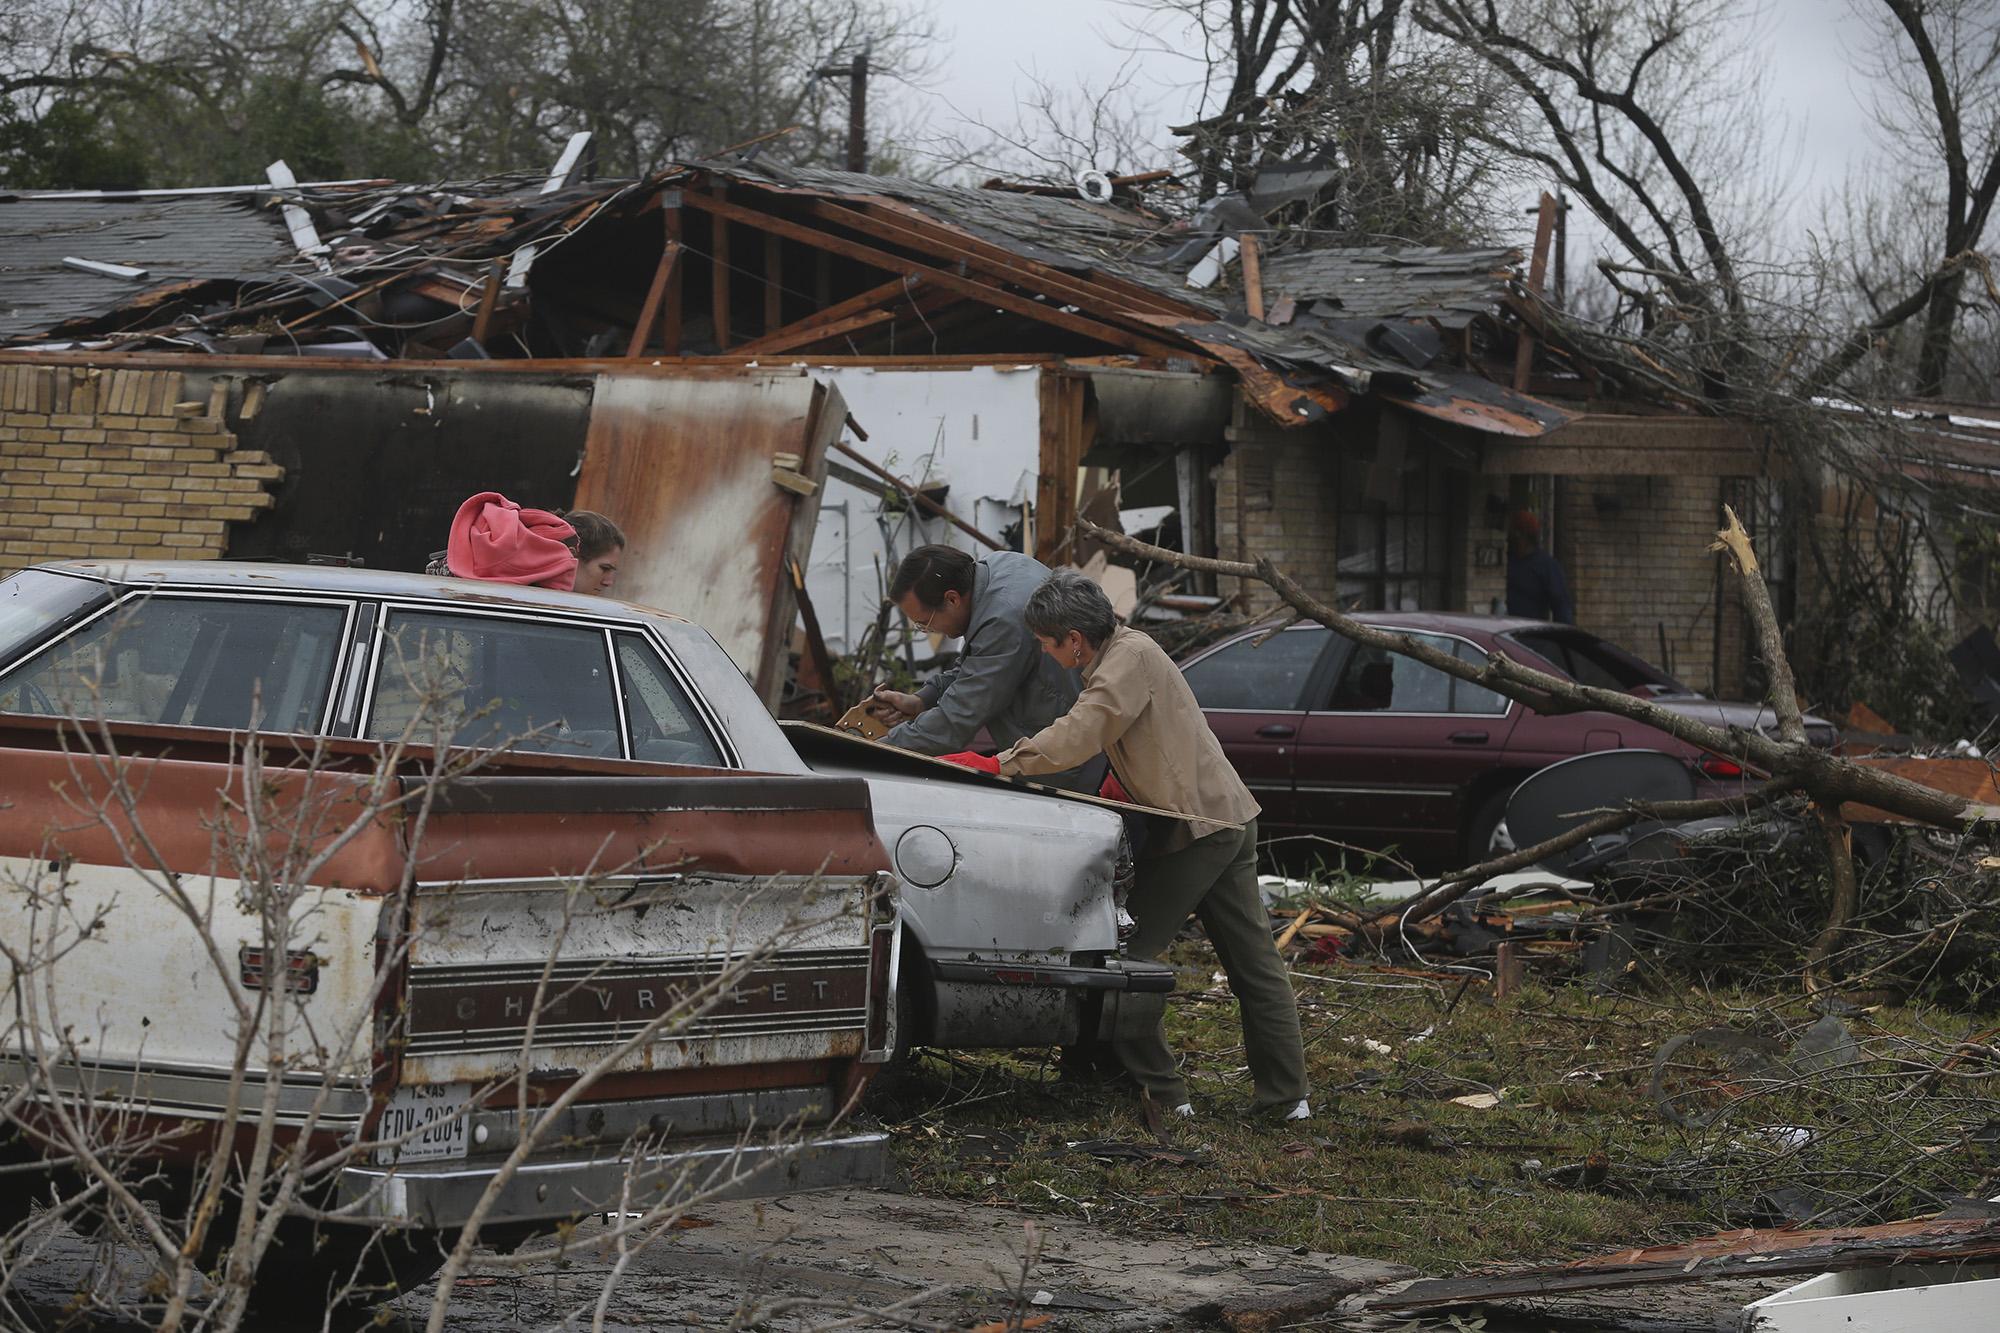 Damage from San Antonio tornadoes, storms could total $100 million